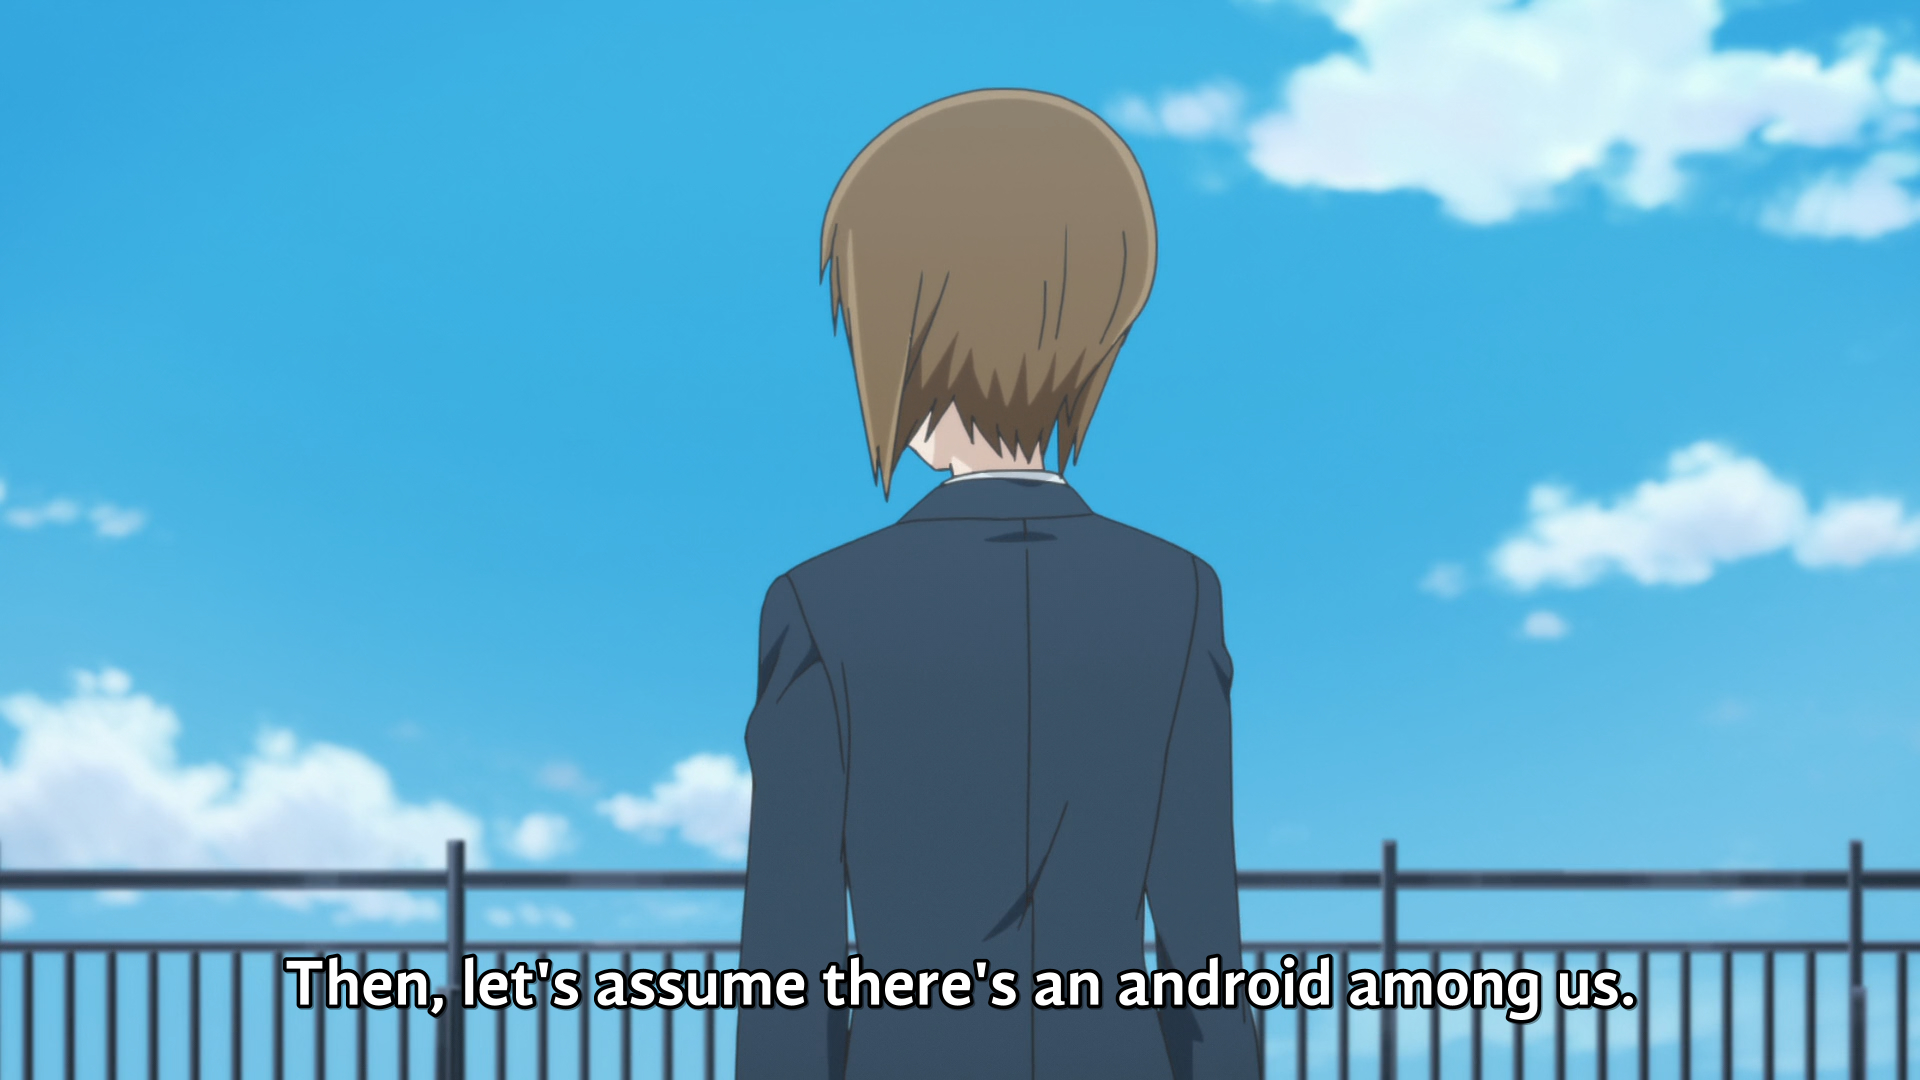 "Then, let's assume there's an android among us."